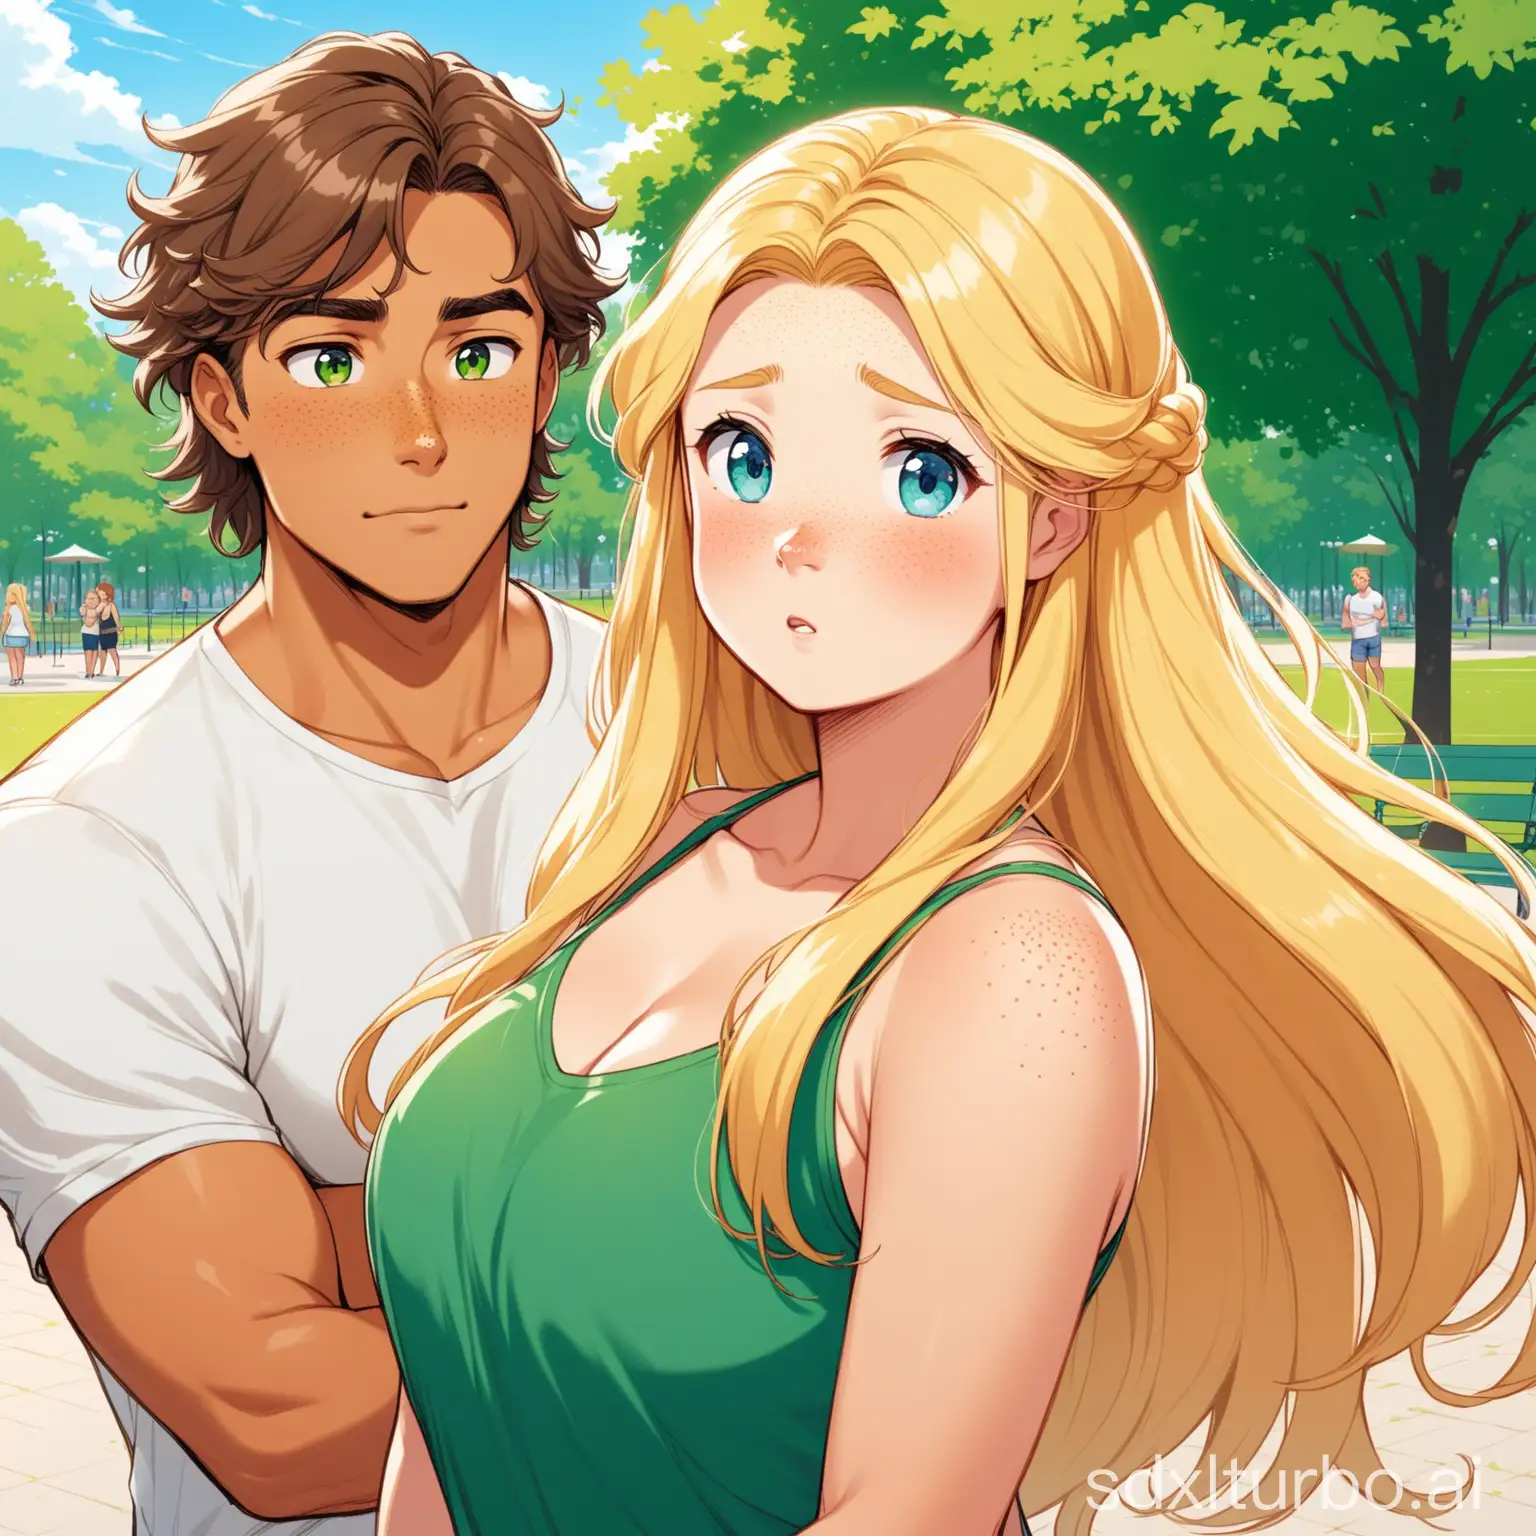 a handsome tanned chubby and young man, with brown mullet hair and green eyes, annoying a Scandinavian blond girl, with blue eyes, frizzy long hair and bangs, freckles, blushing expression, in a park, full view